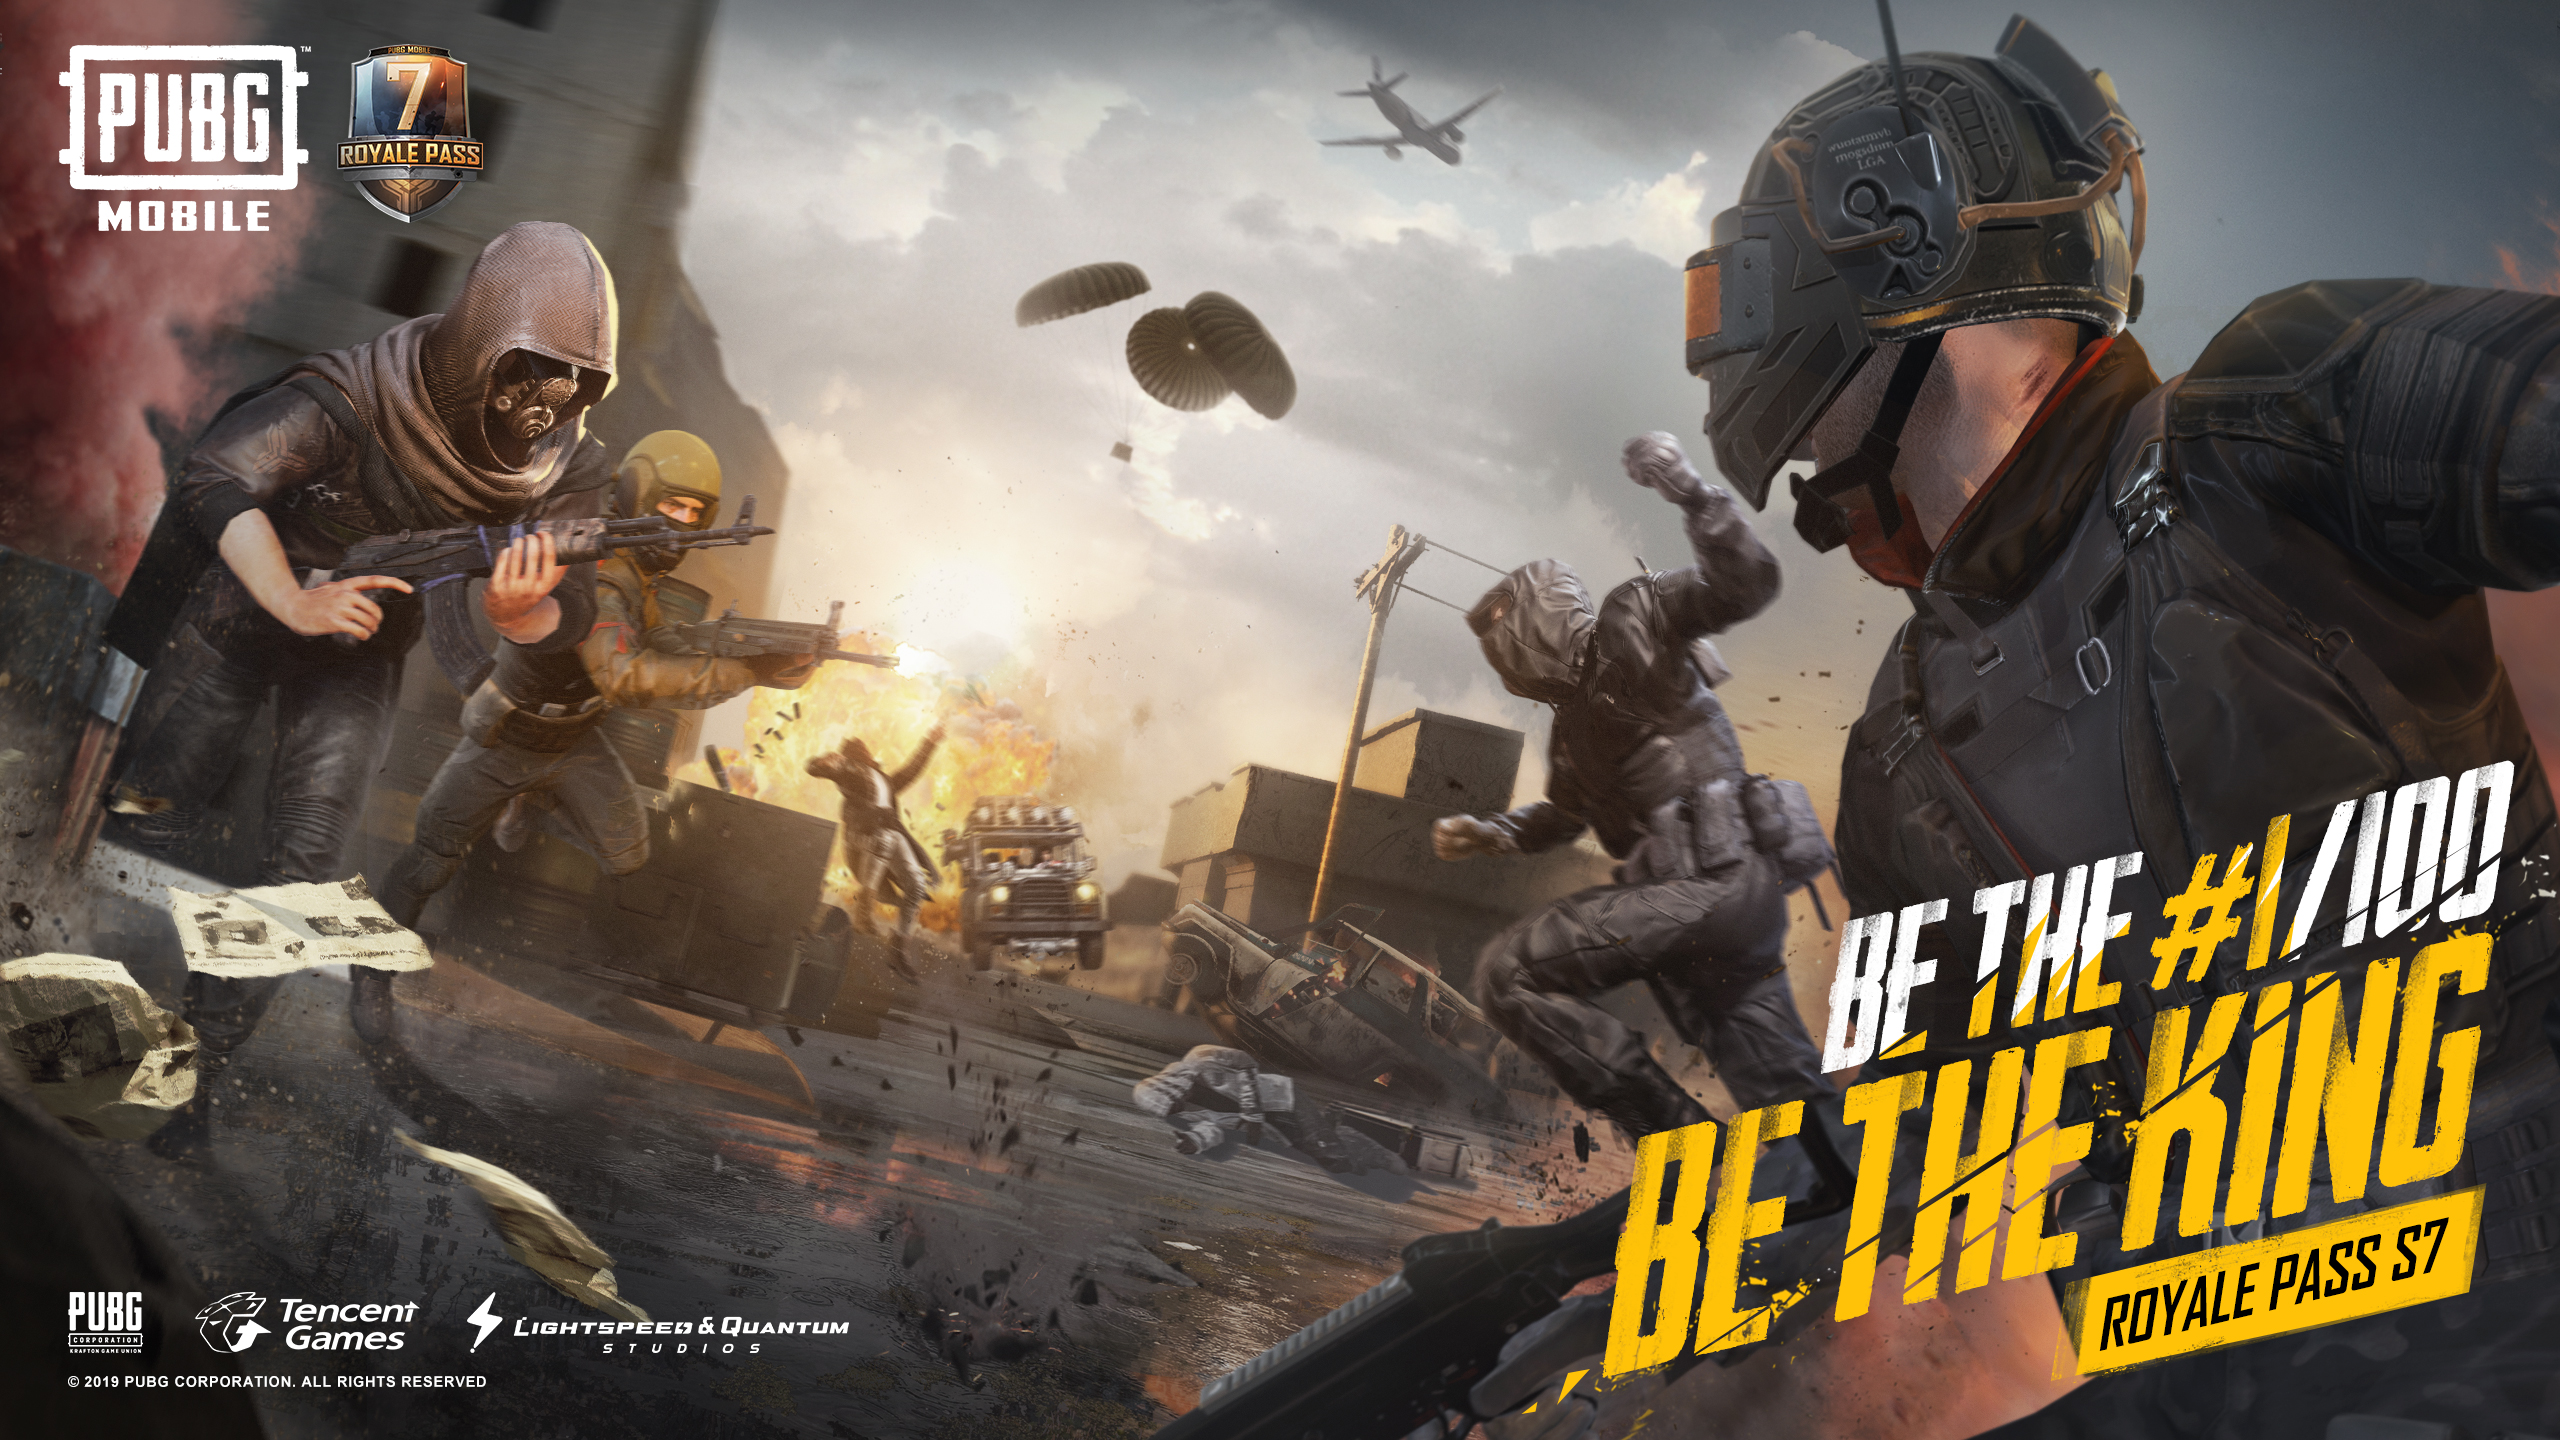 Pubg mobile official home